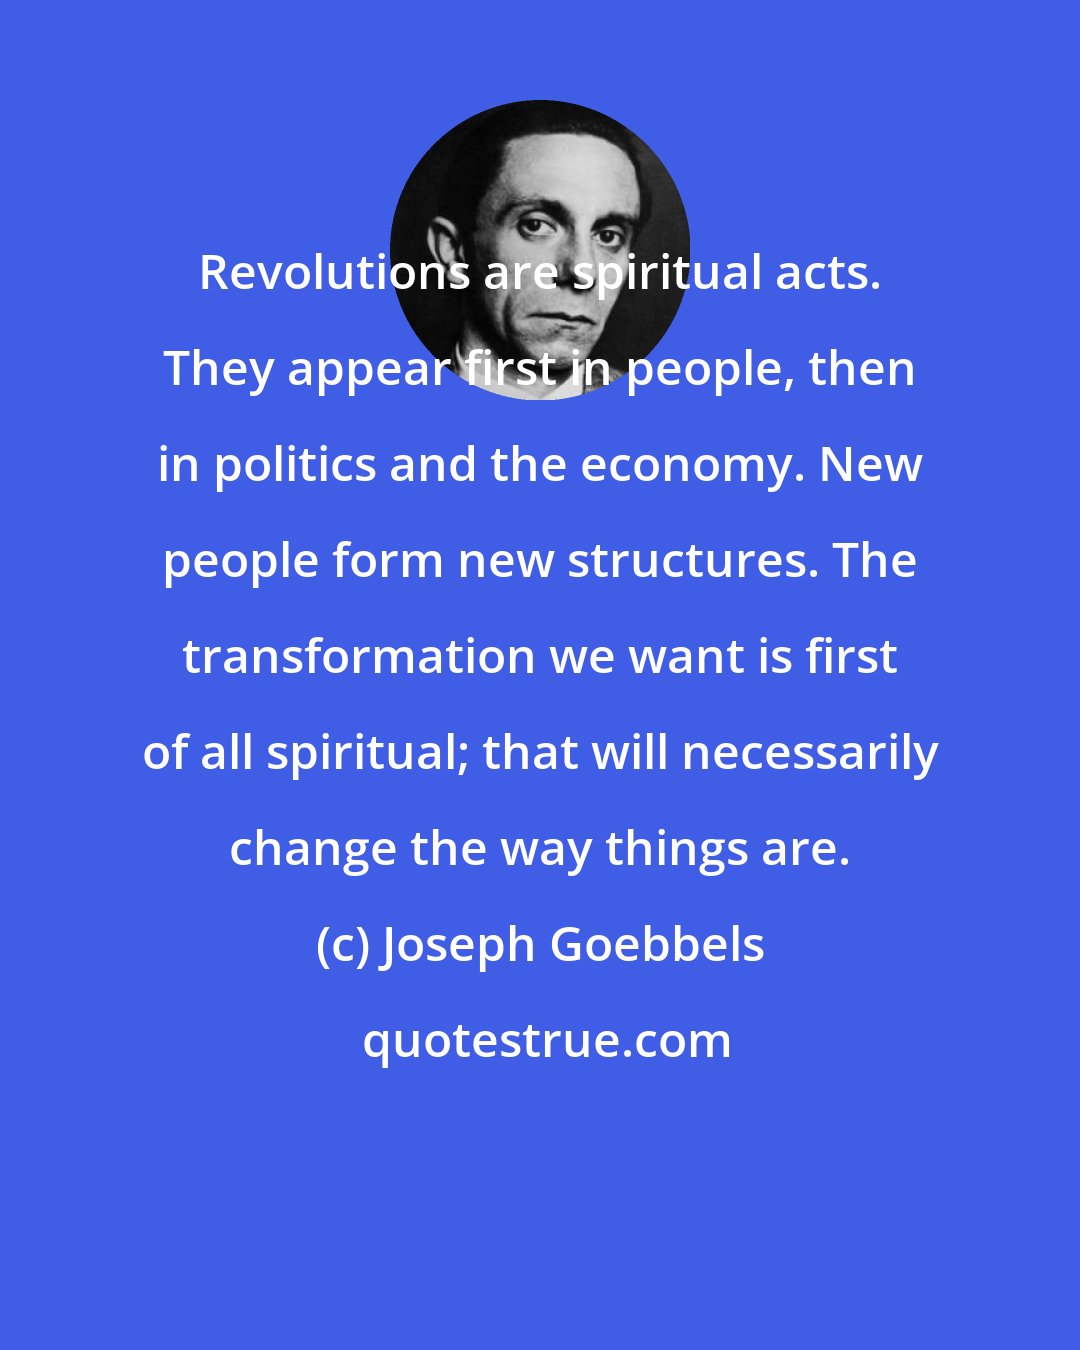 Joseph Goebbels: Revolutions are spiritual acts. They appear first in people, then in politics and the economy. New people form new structures. The transformation we want is first of all spiritual; that will necessarily change the way things are.